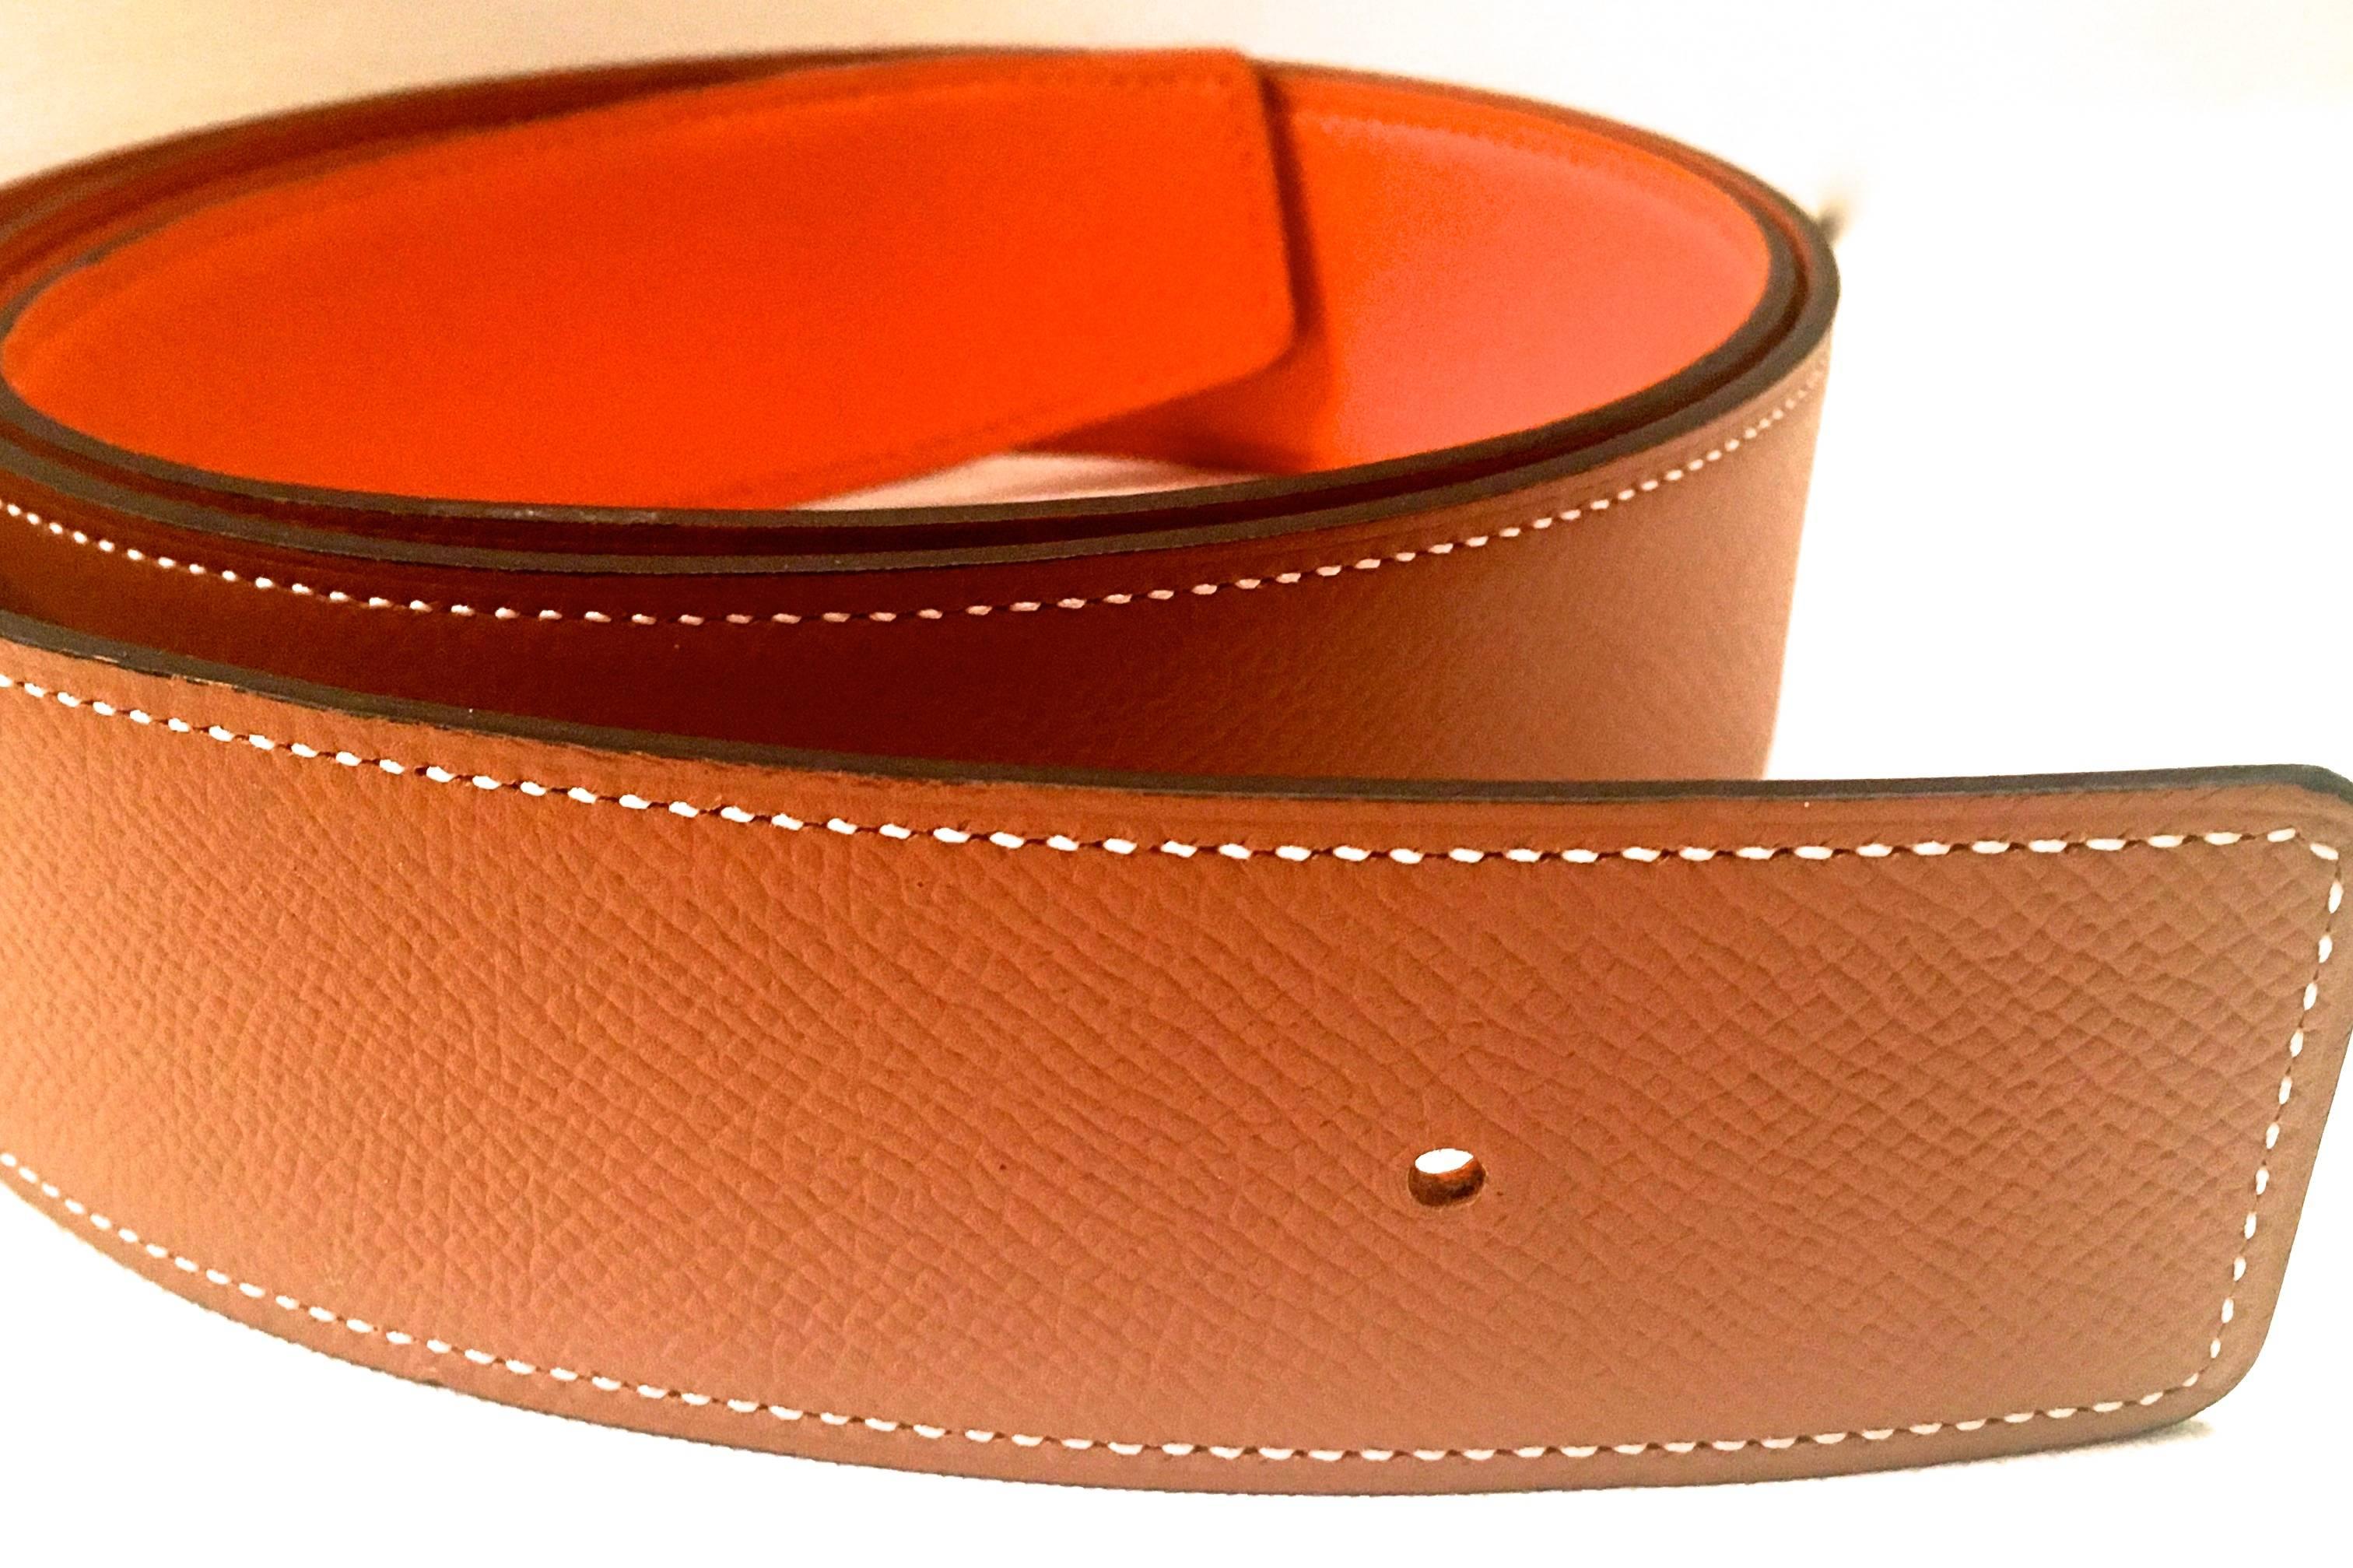 Presented here is a beautiful leather strap from Hermes Paris. The strap is comprised of epsom leather on both sides of the strap. The strap is reversible and can be worn with either color. The strap is orange on one side and Hermes gold which is a